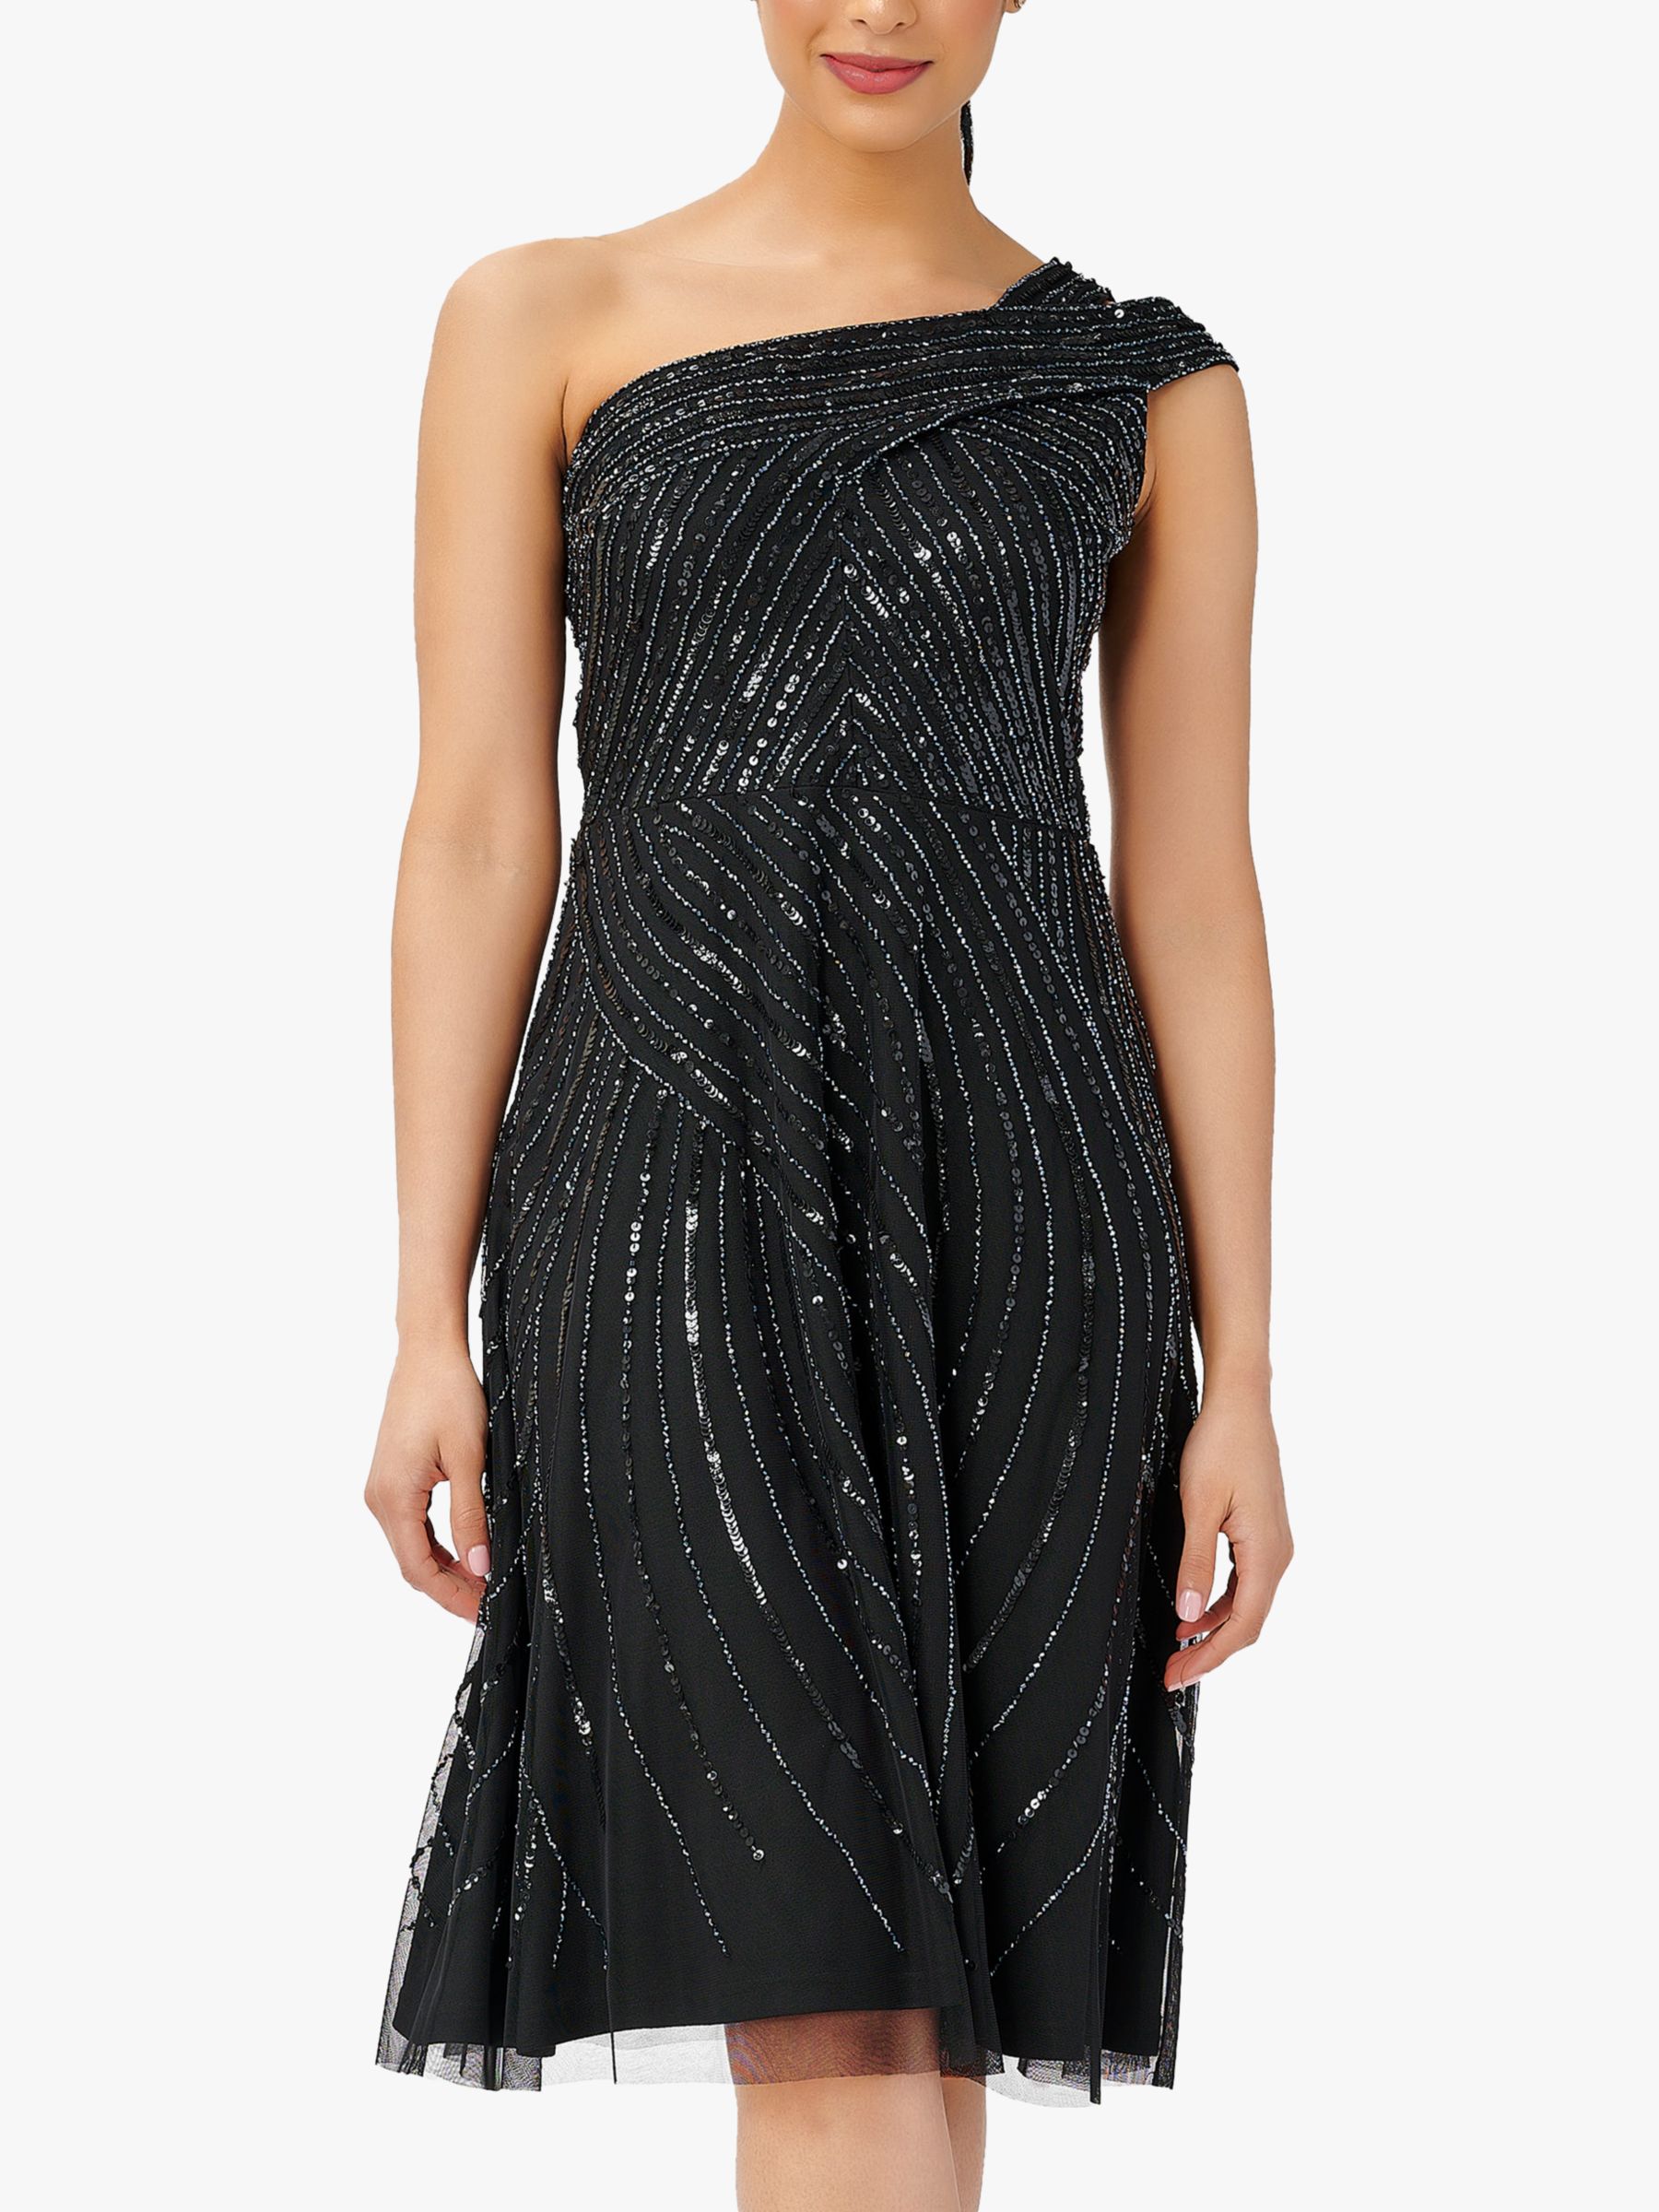 Adrianna Papell Beaded One Shoulder Dress, Black